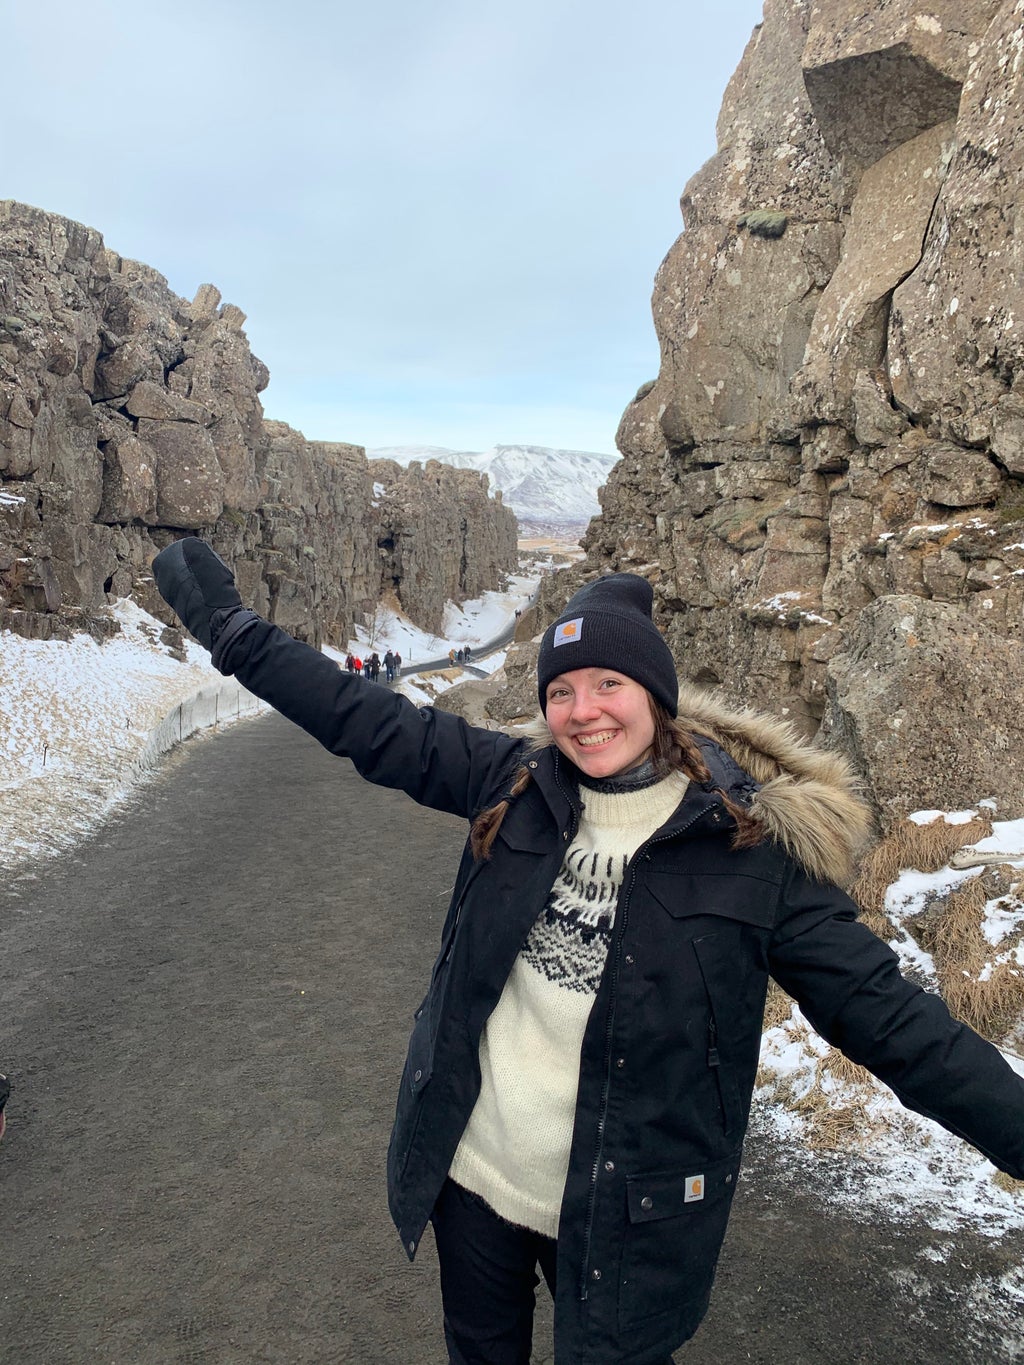 Myself between the Eurasion and North American tectonic plates